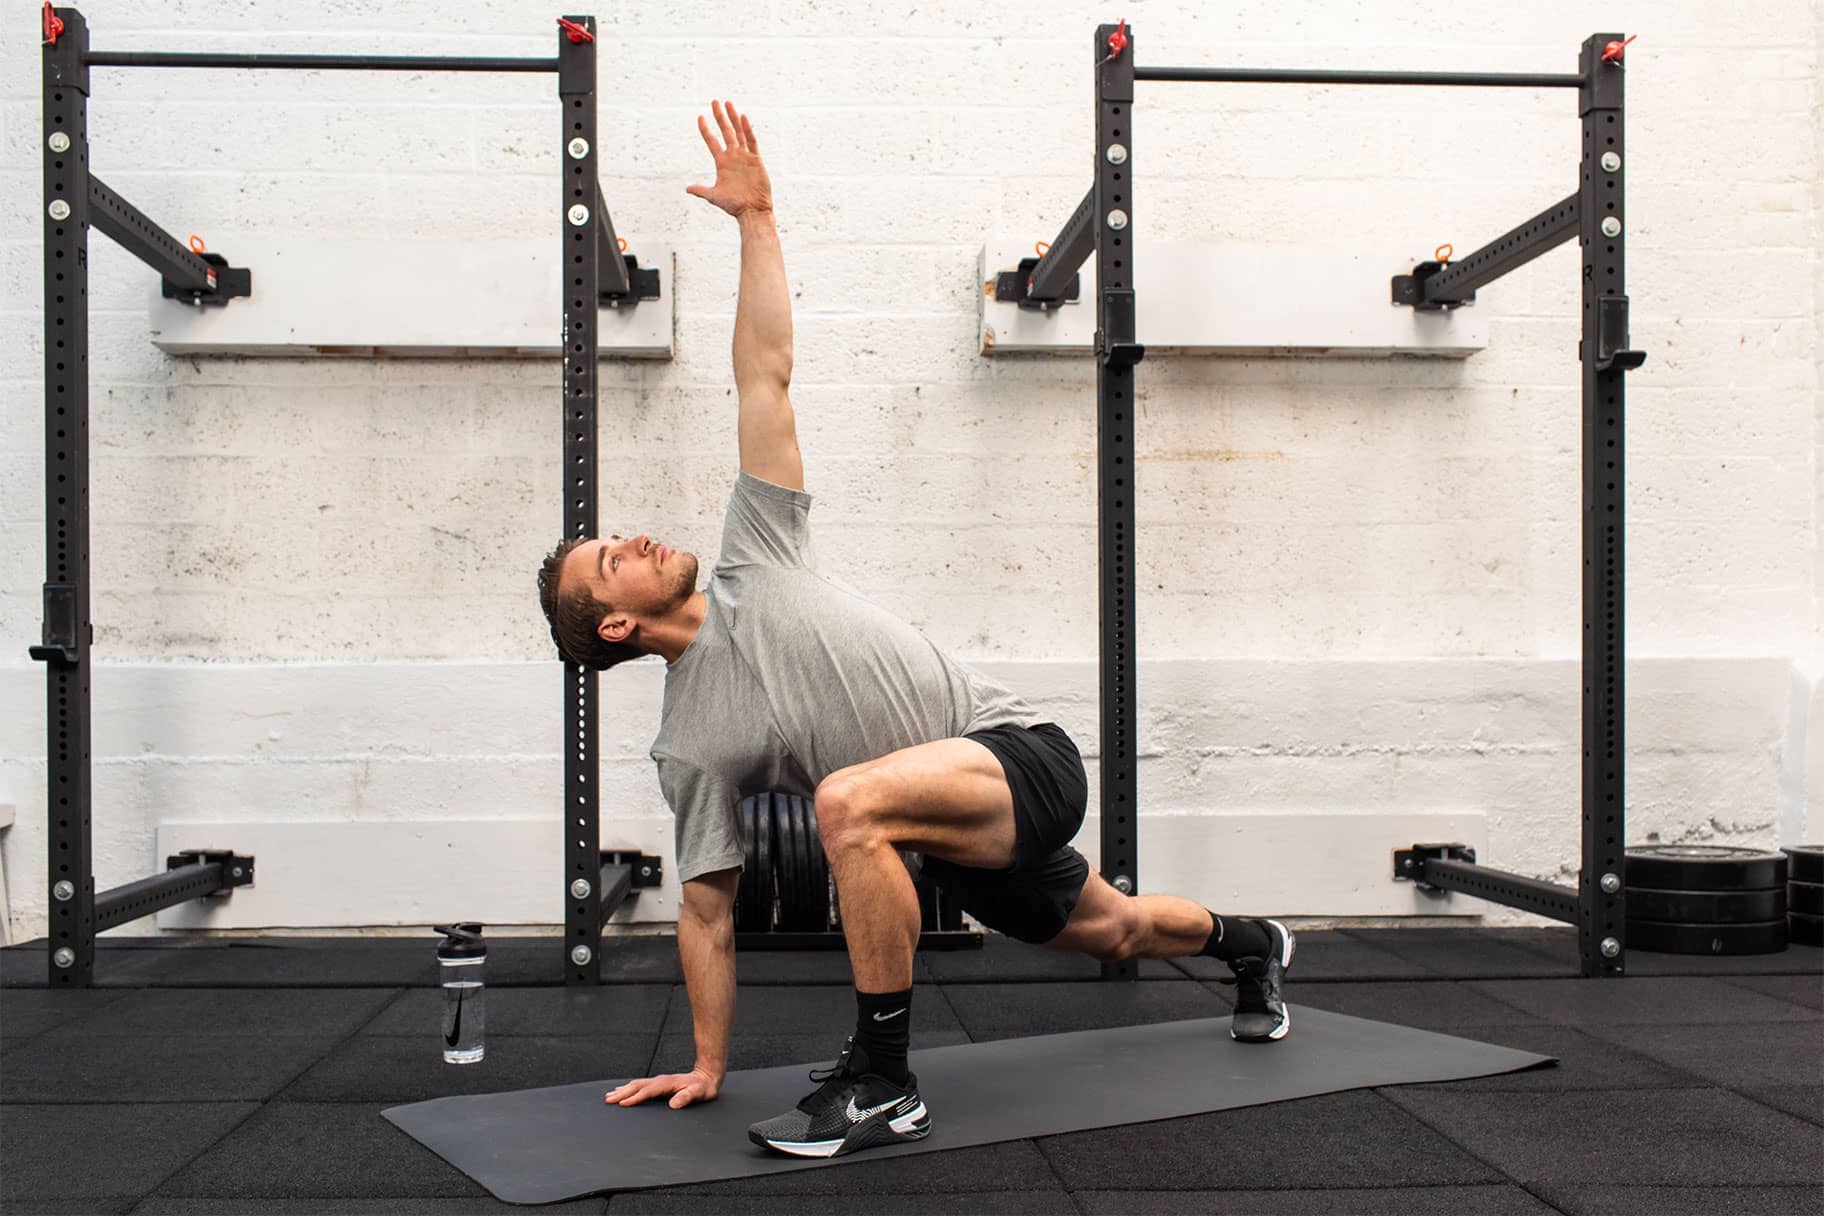 5 Arm Workouts To Improve Upper Body Strength, According To